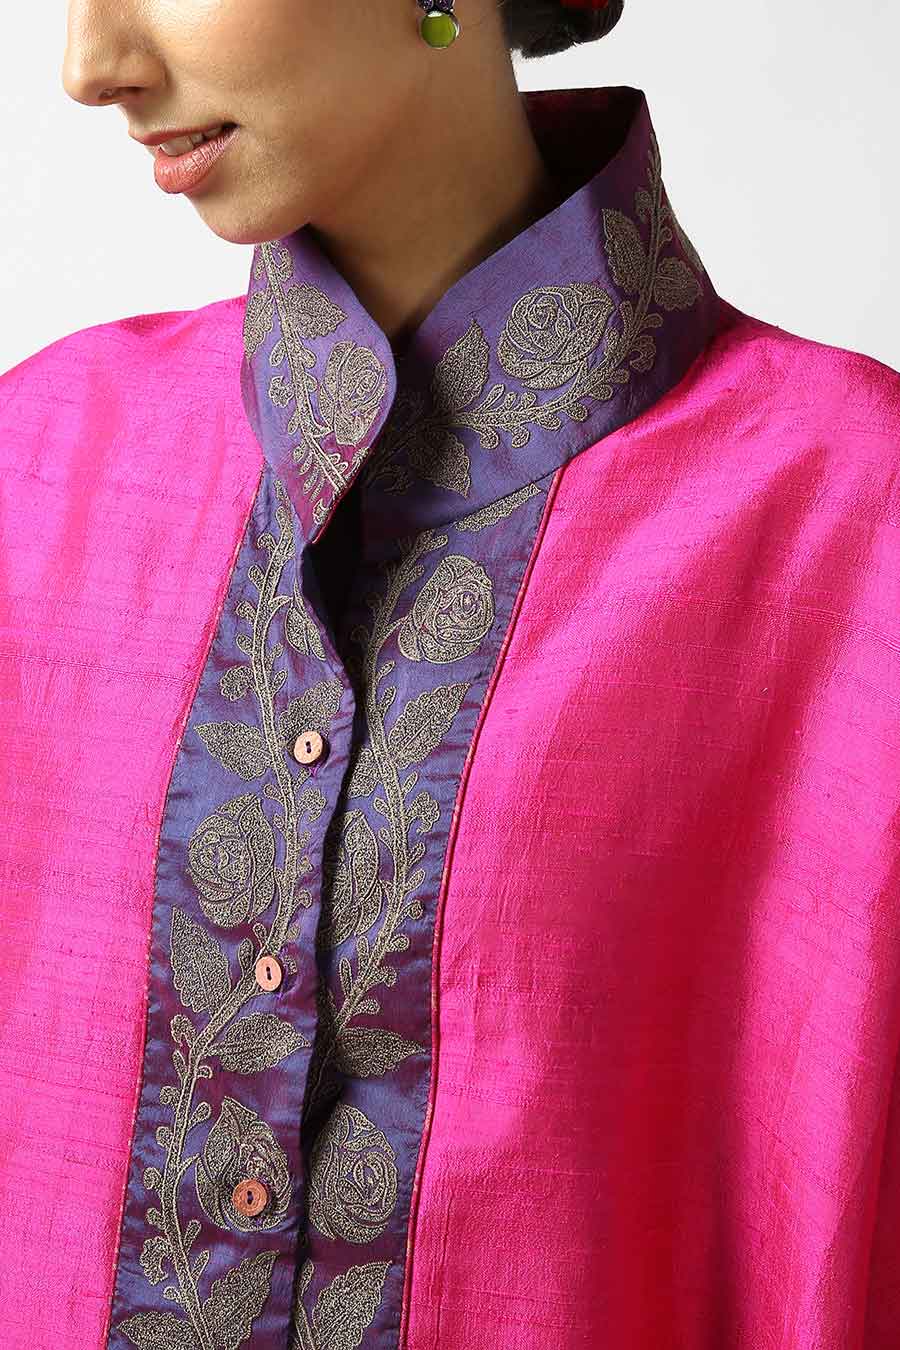 Pink Raw Silk Embroidered Top